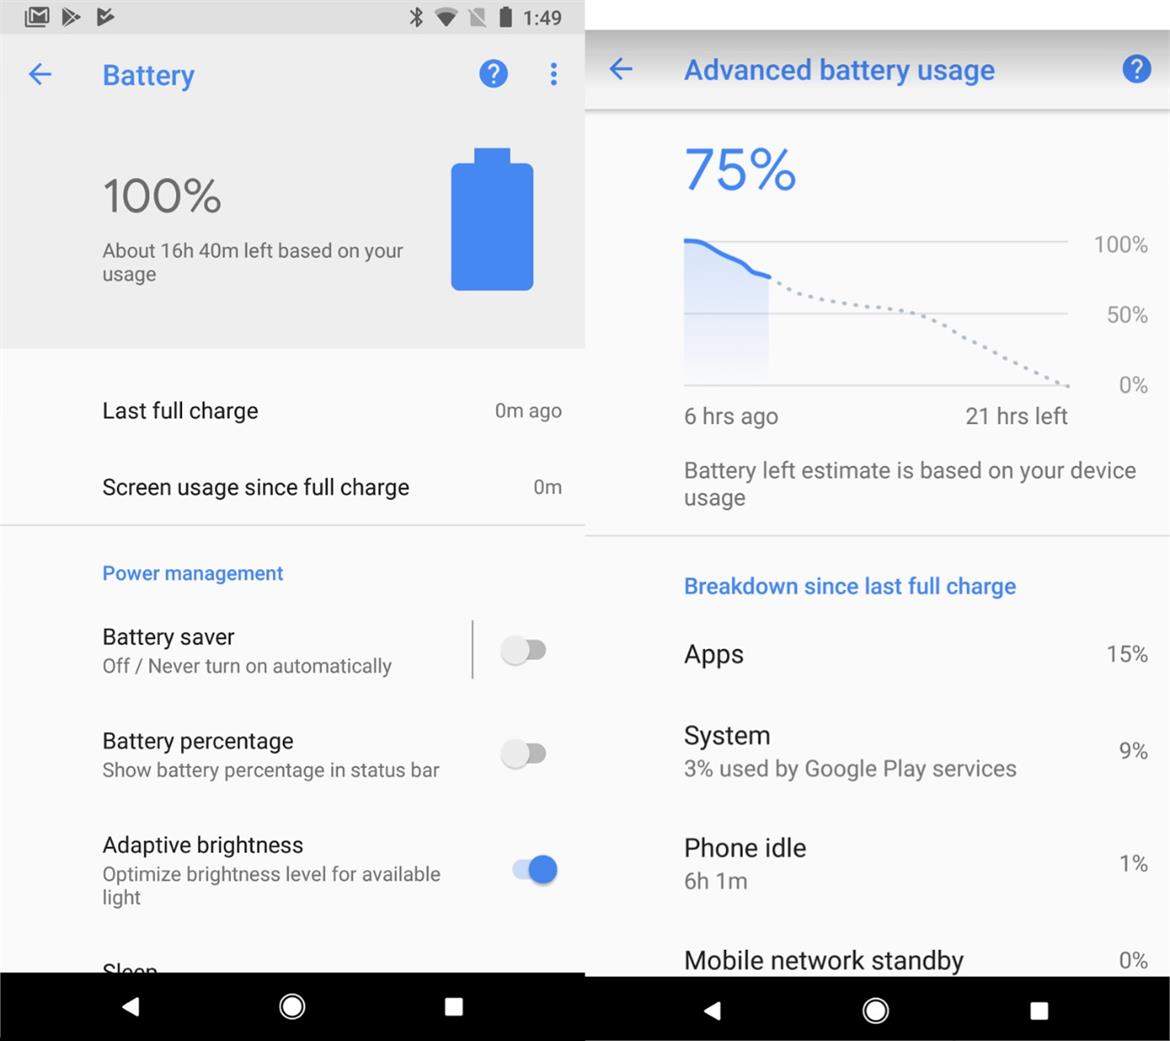 Google Pixel Battery Life Estimates Now More Accurate With Personalized Usage Modeling